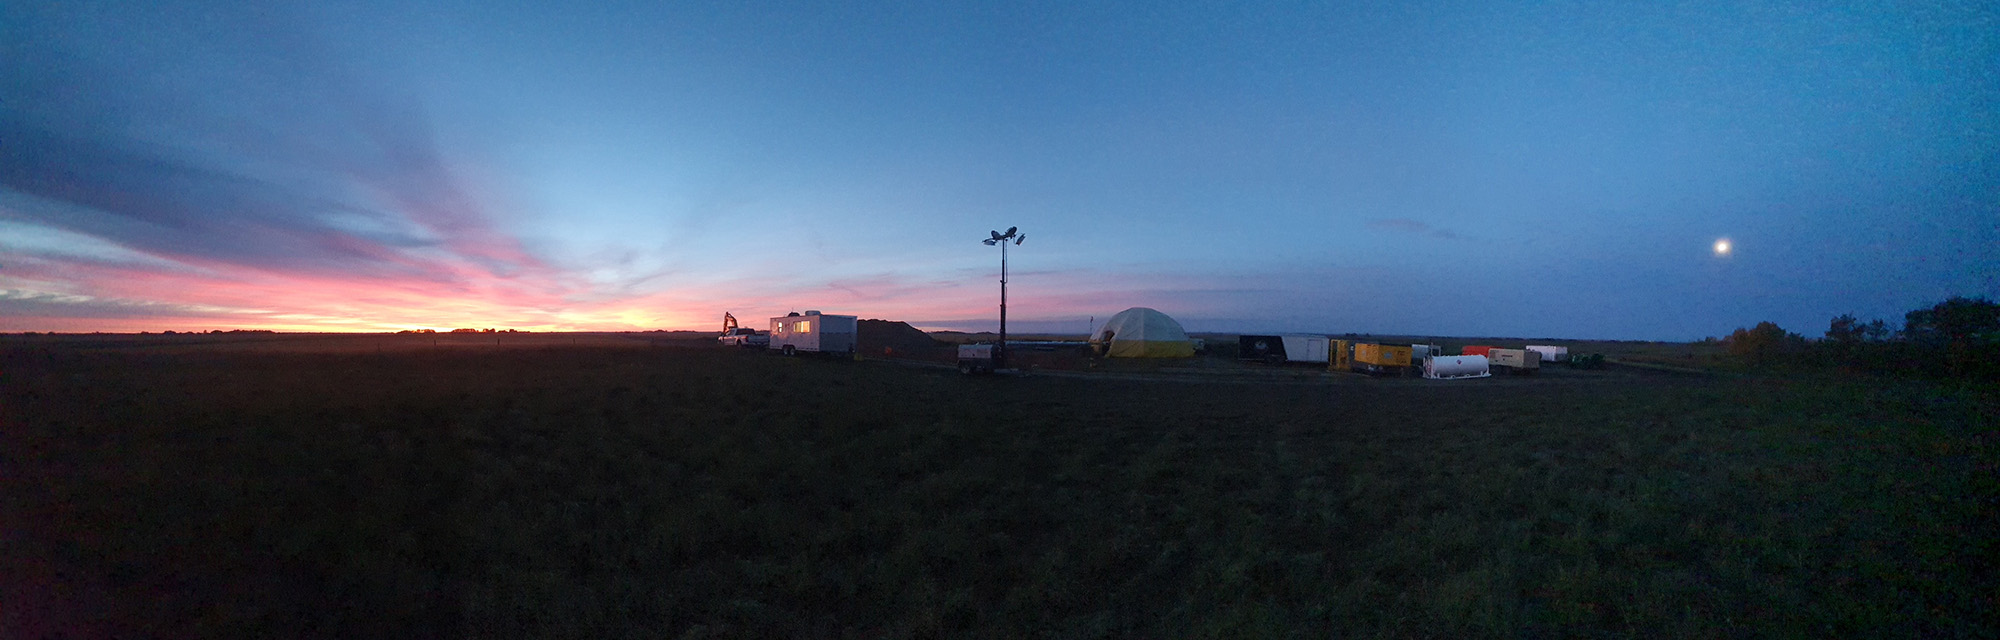 sunset at enerclear site